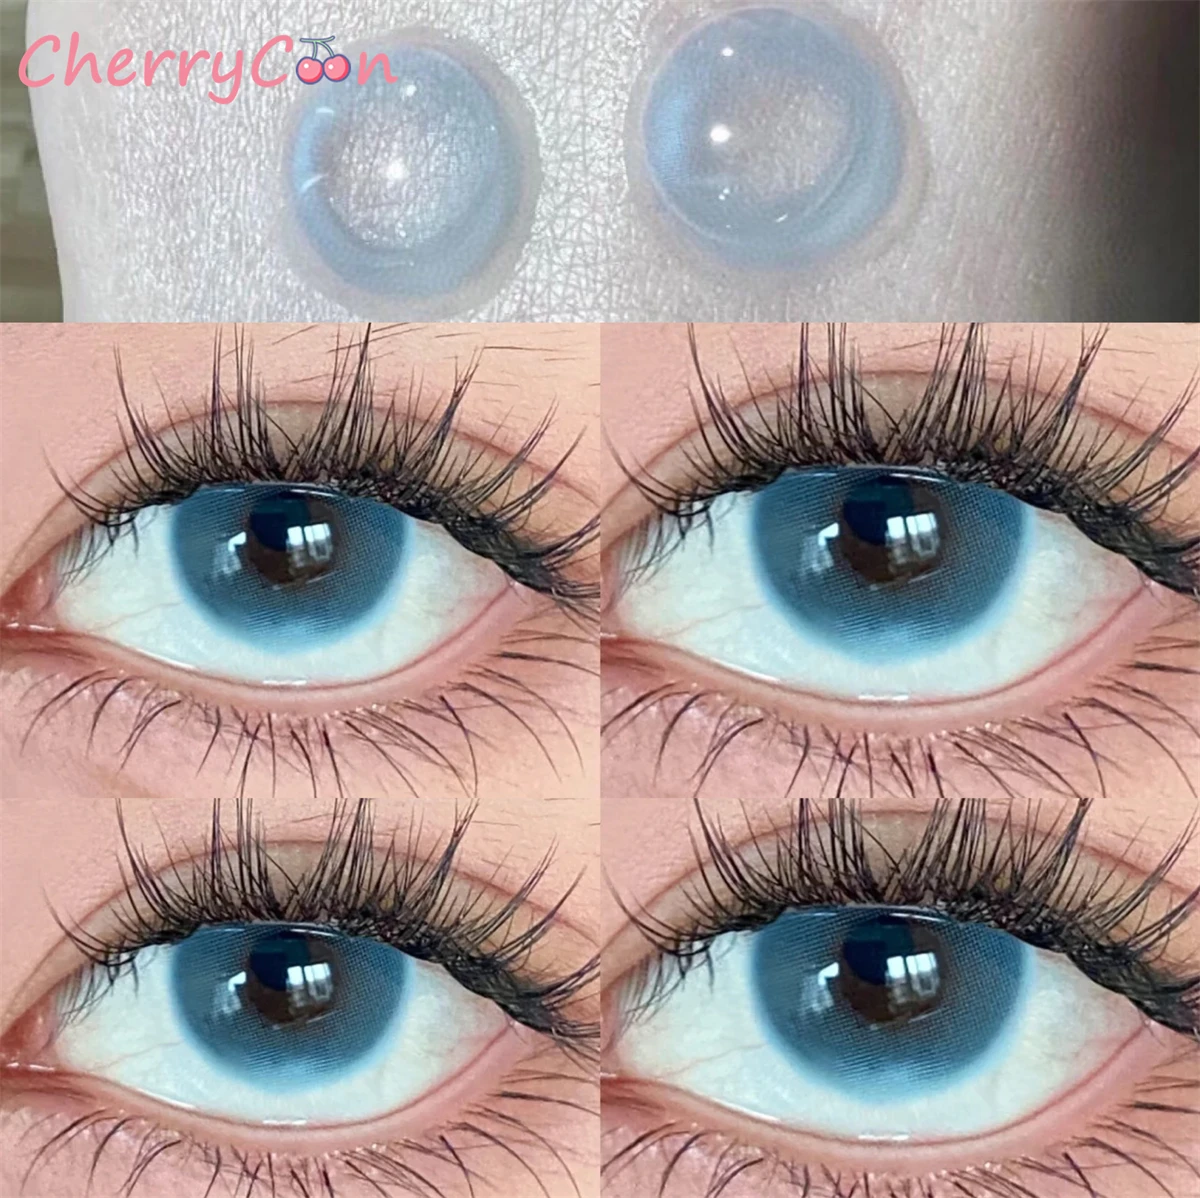 

CherryCon spirit blue gray Contact Lenses big beauty pupil yearly Colored Soft for Eyes Contact Lens Myopia Prescription degrees